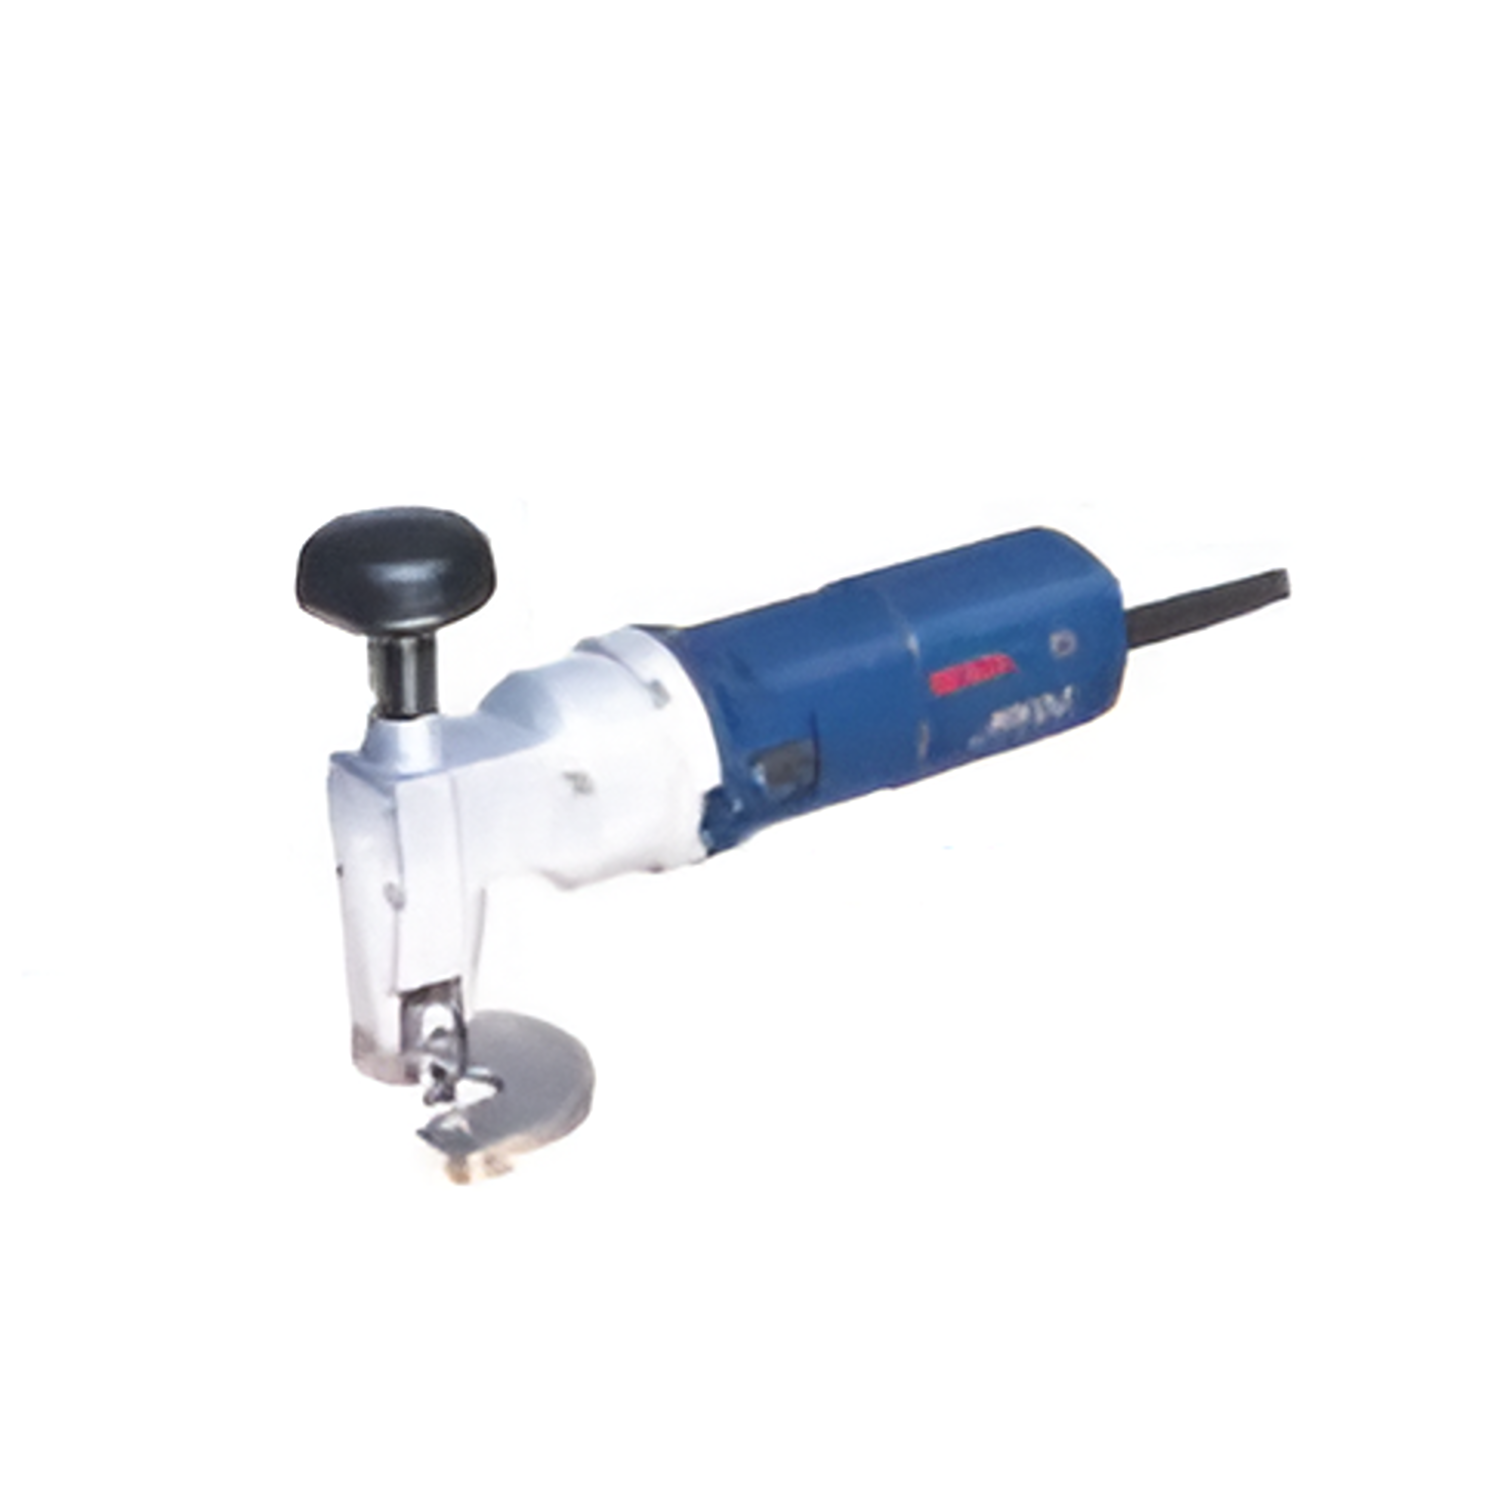 YEW AIK AC00409 Shear Power Tools GSC 2.8 - Premium Power Tools from YEW AIK - Shop now at Yew Aik.